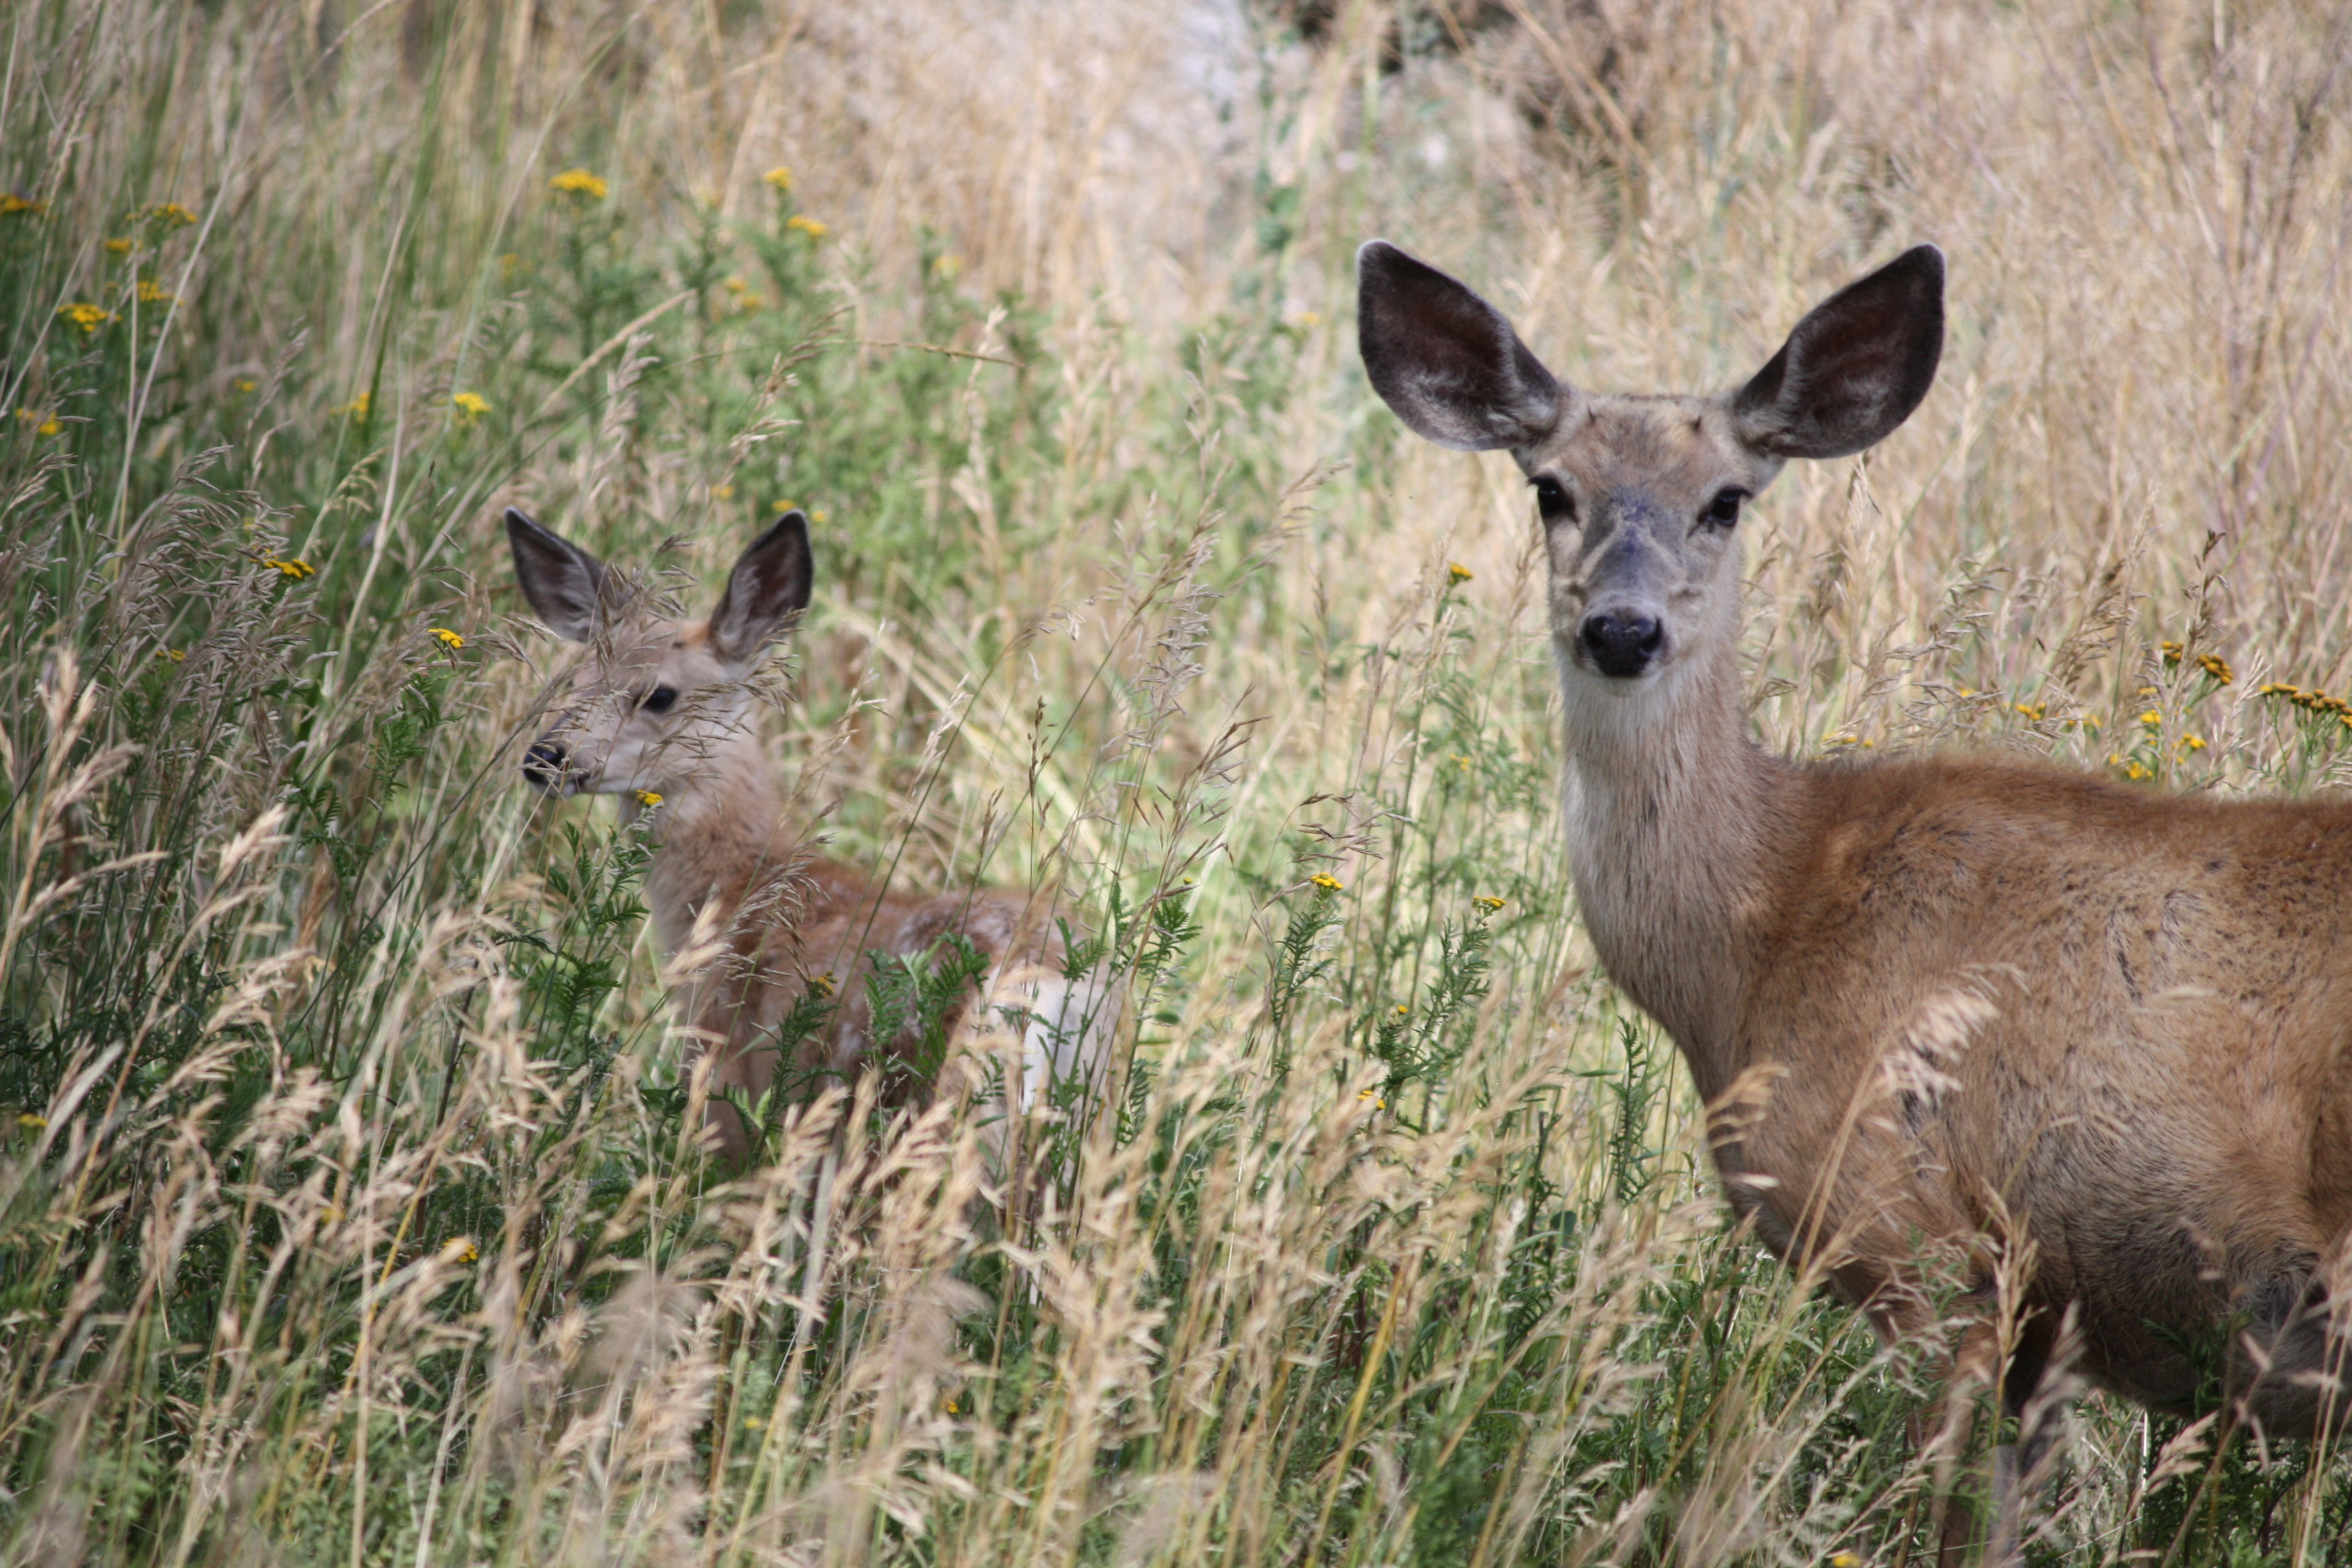 Mom and baby deer in Yellowstone National Park